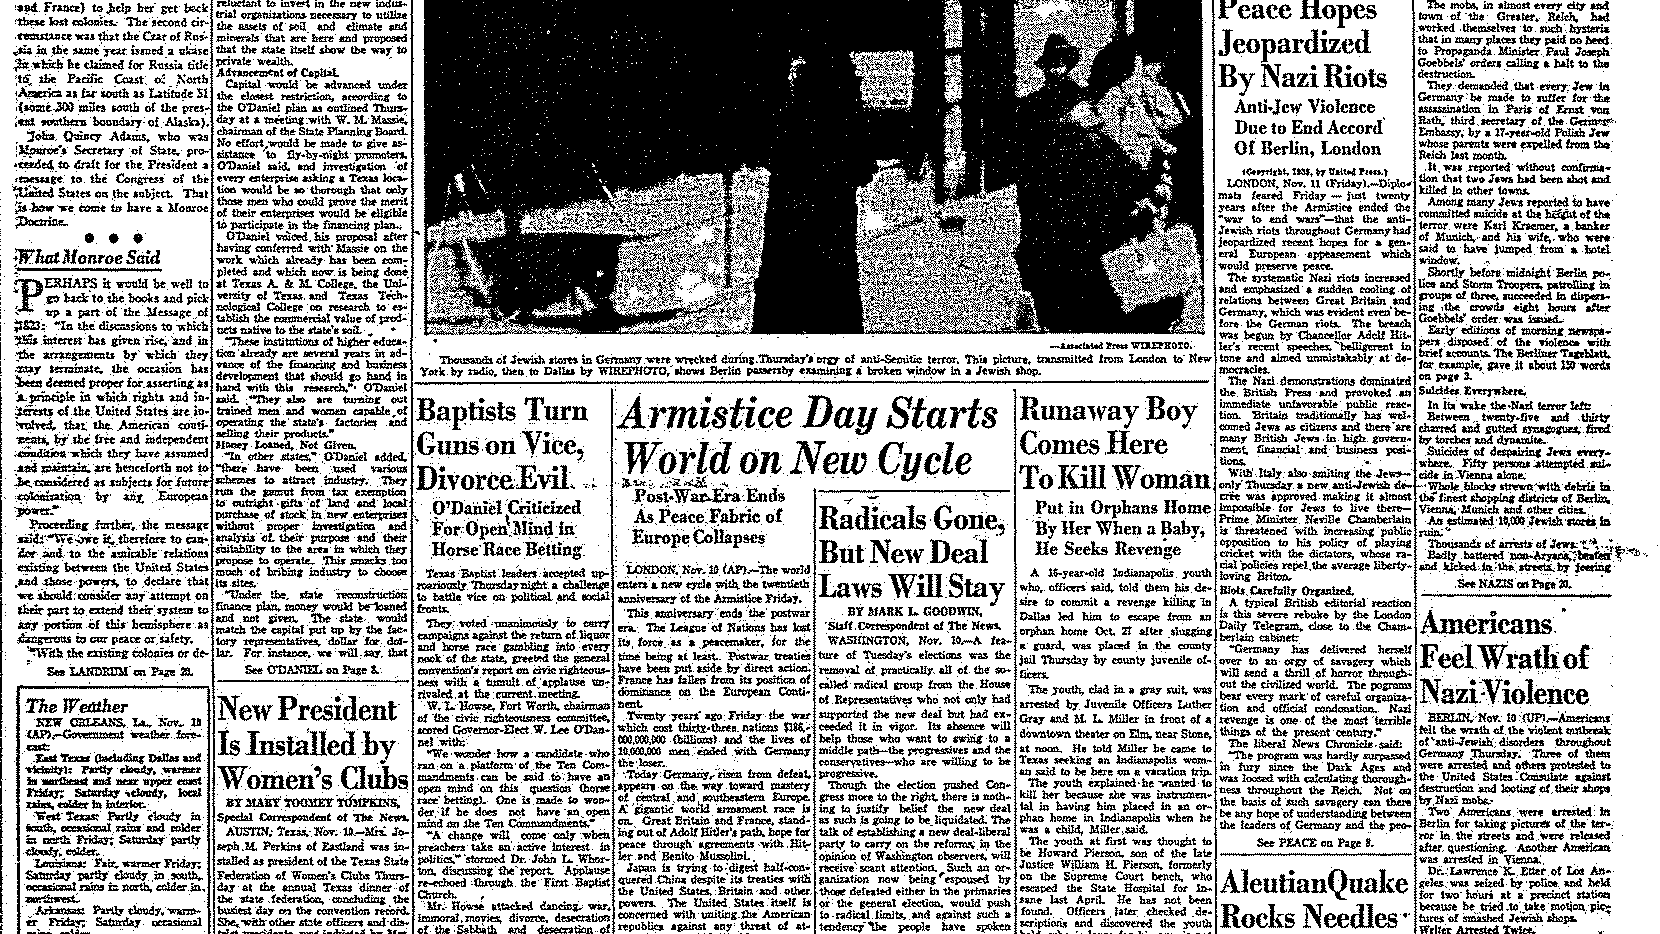  Front page of The Dallas Morning News on Nov. 11, 1938.